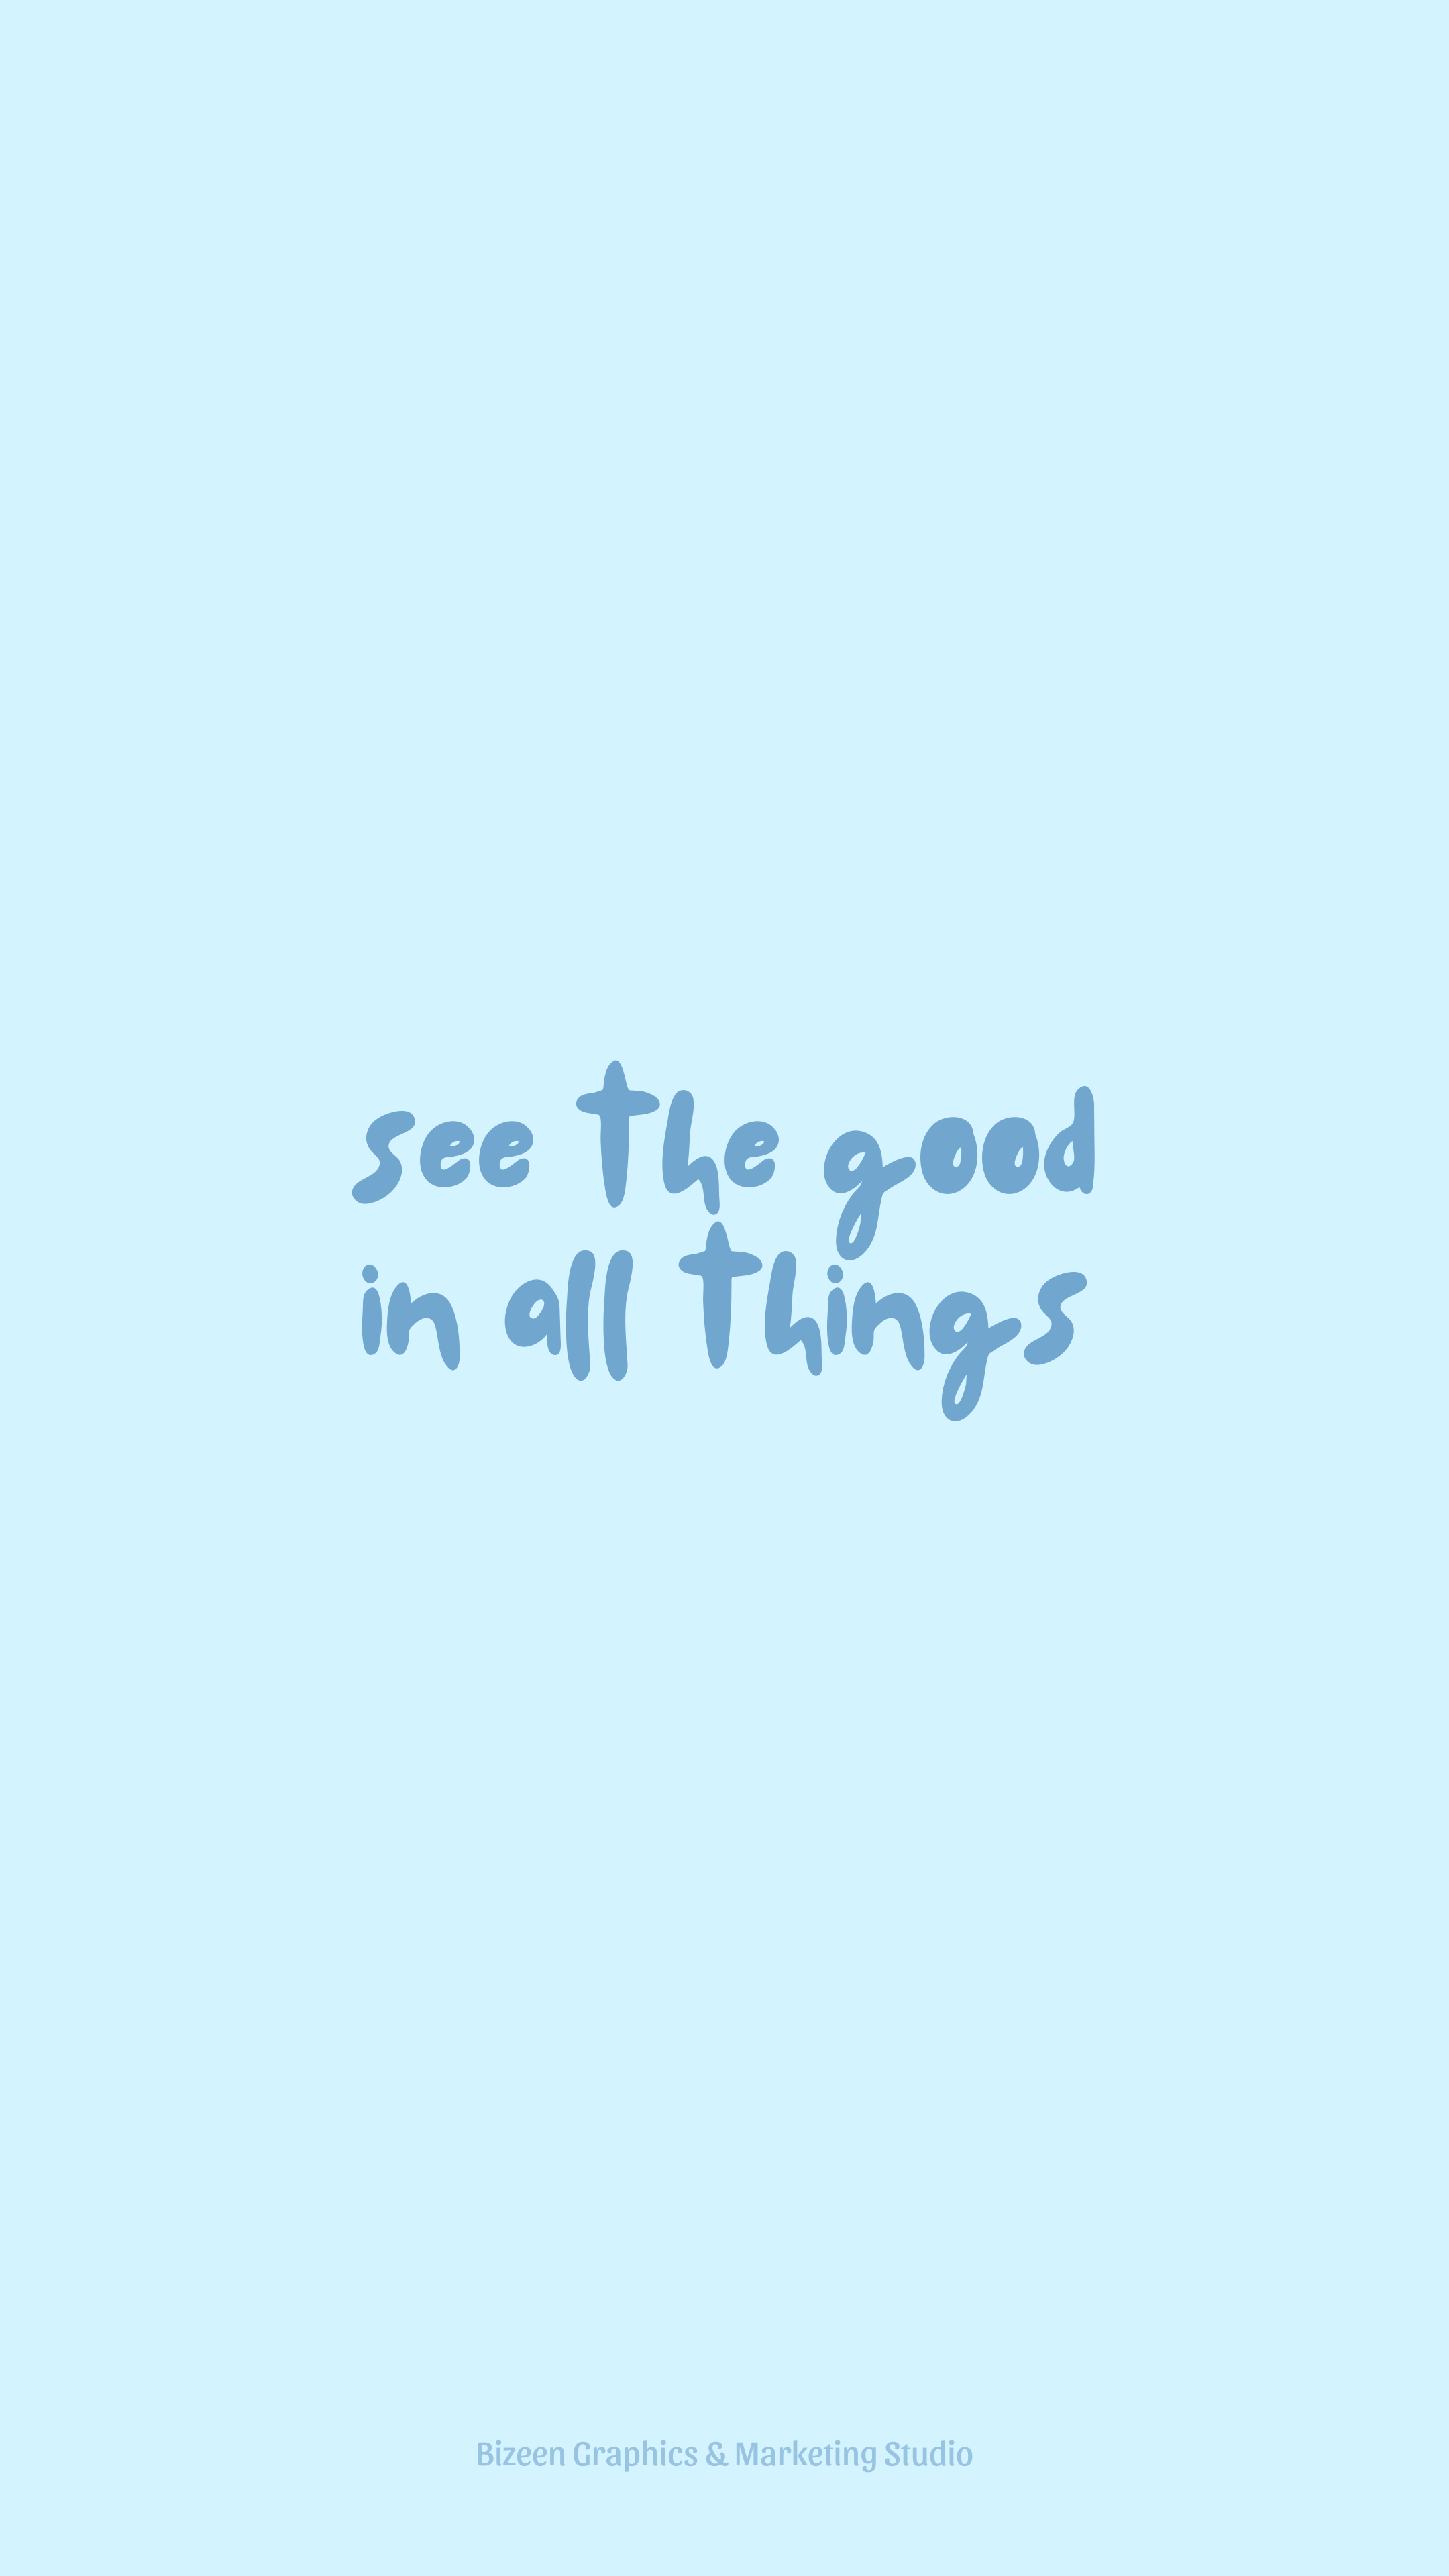 Pastel Blue Aesthetic Wallpaper Quotes See The Good In All